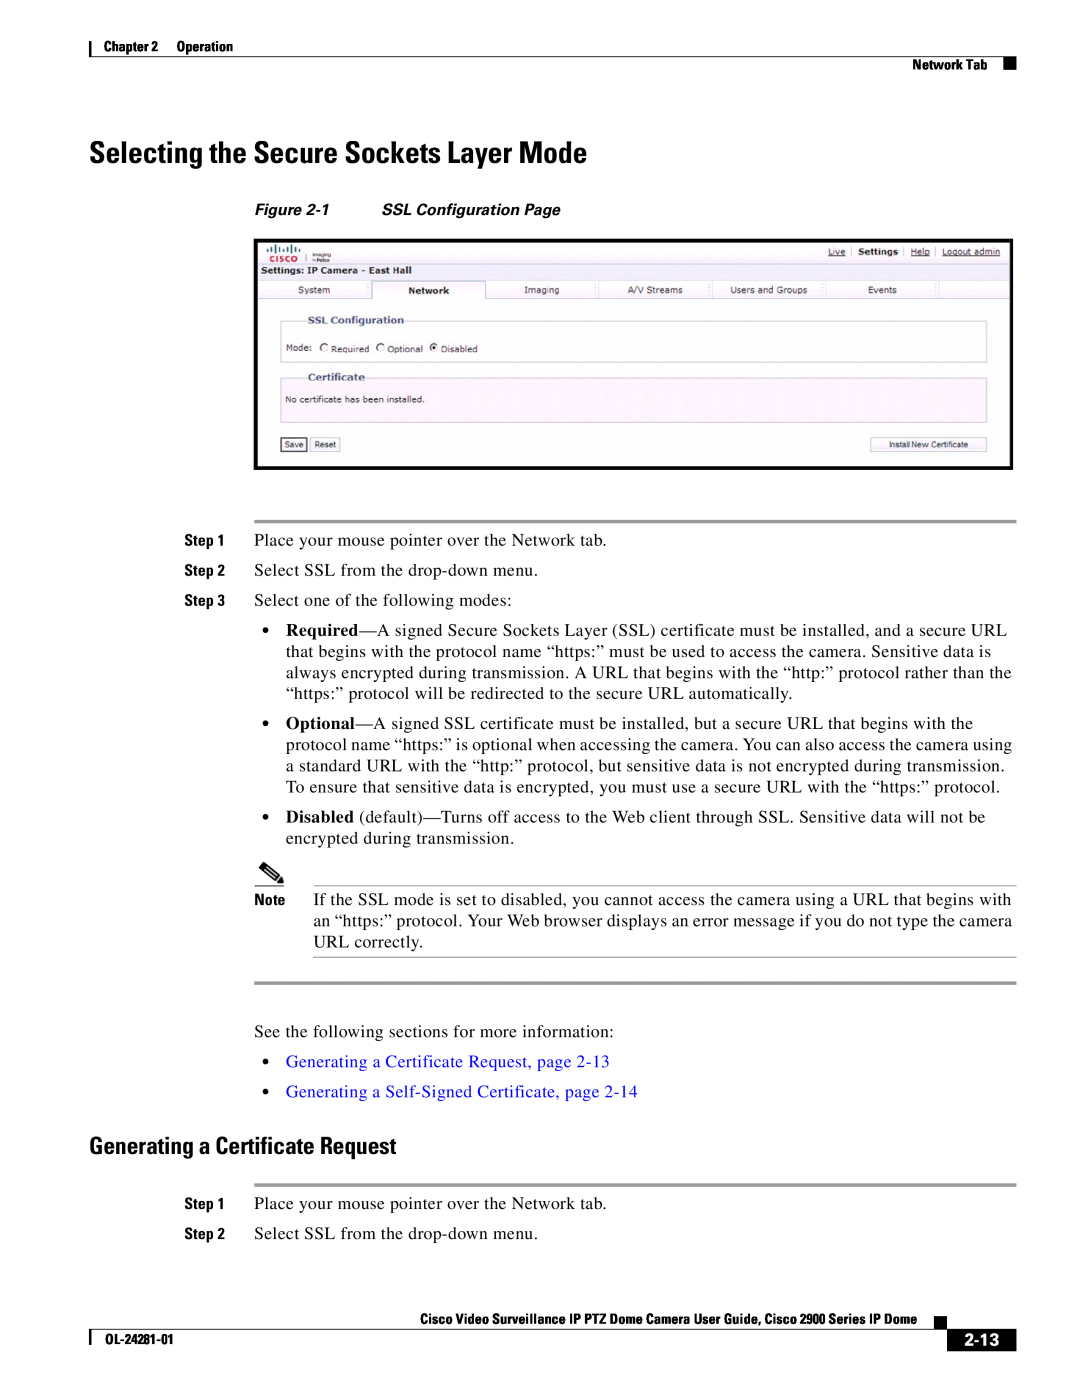 Cisco Systems 2900, OL-24281-01 manual Selecting the Secure Sockets Layer Mode, Generating a Certificate Request, 2-13 